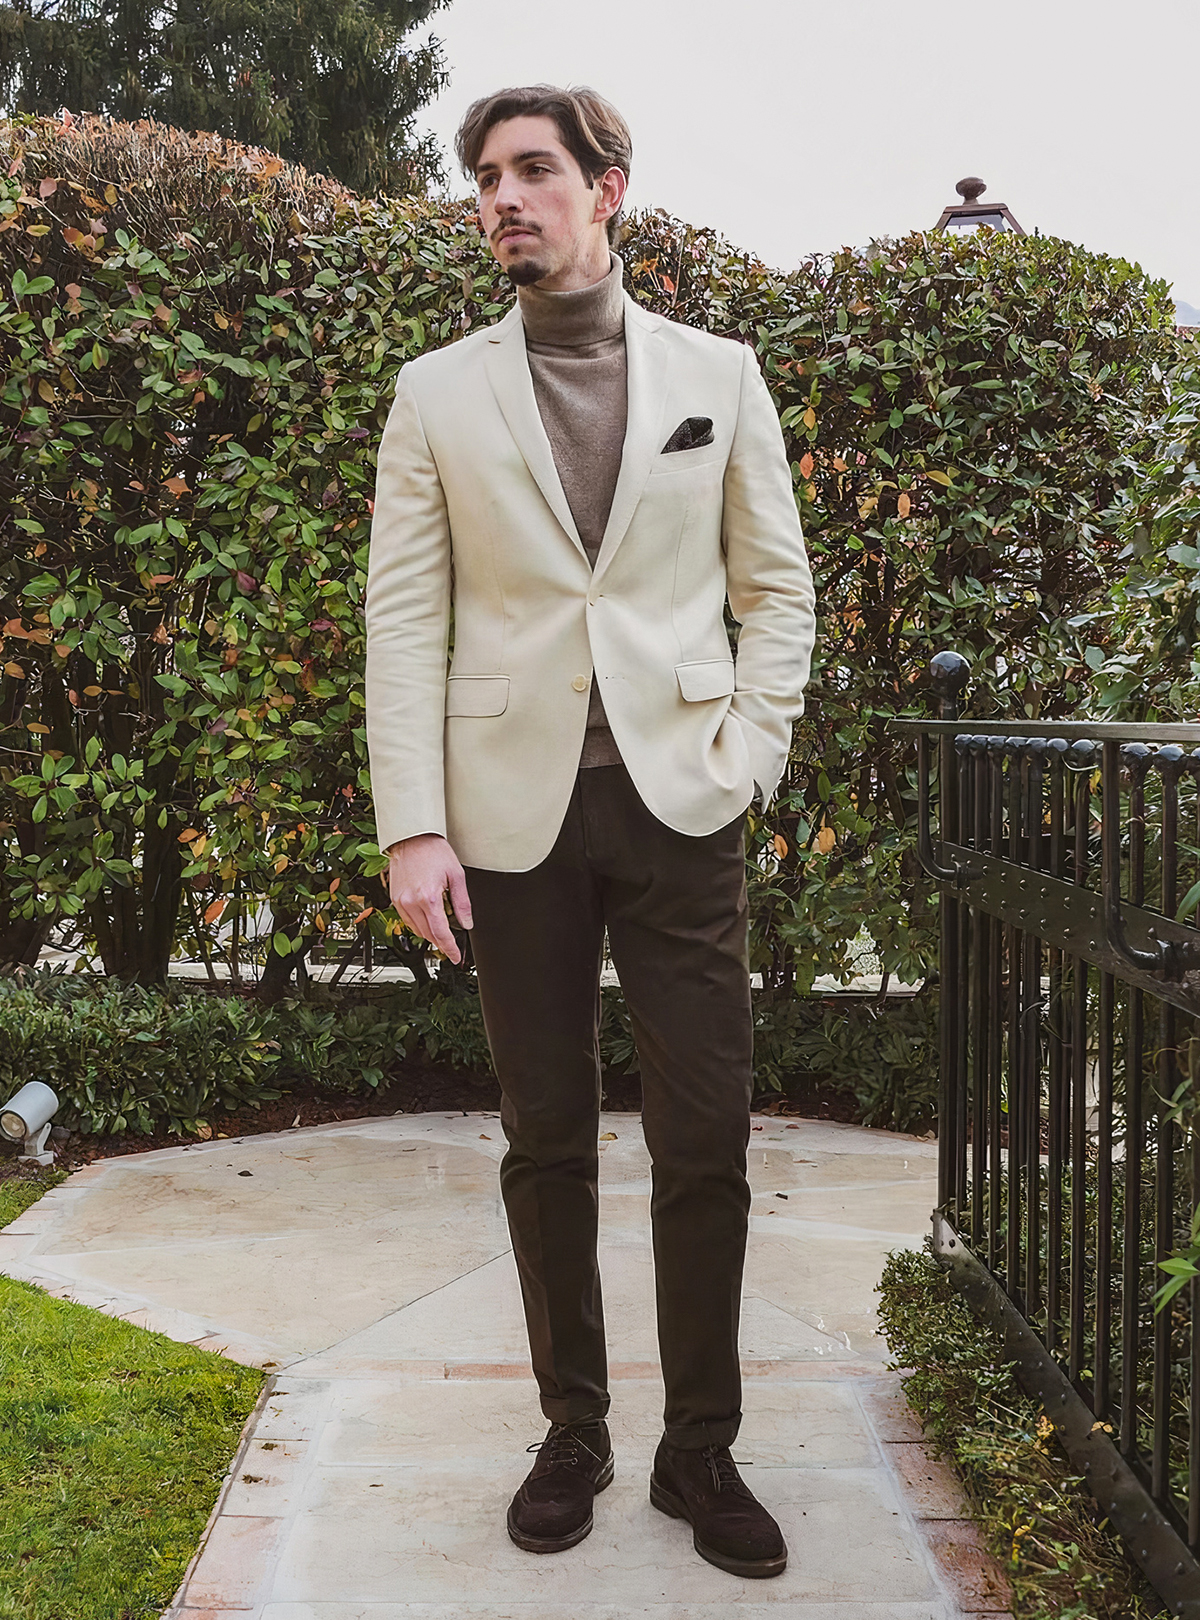 beige blazer, light brown turtleneck, brown chinos, and brown suede brogue shoes